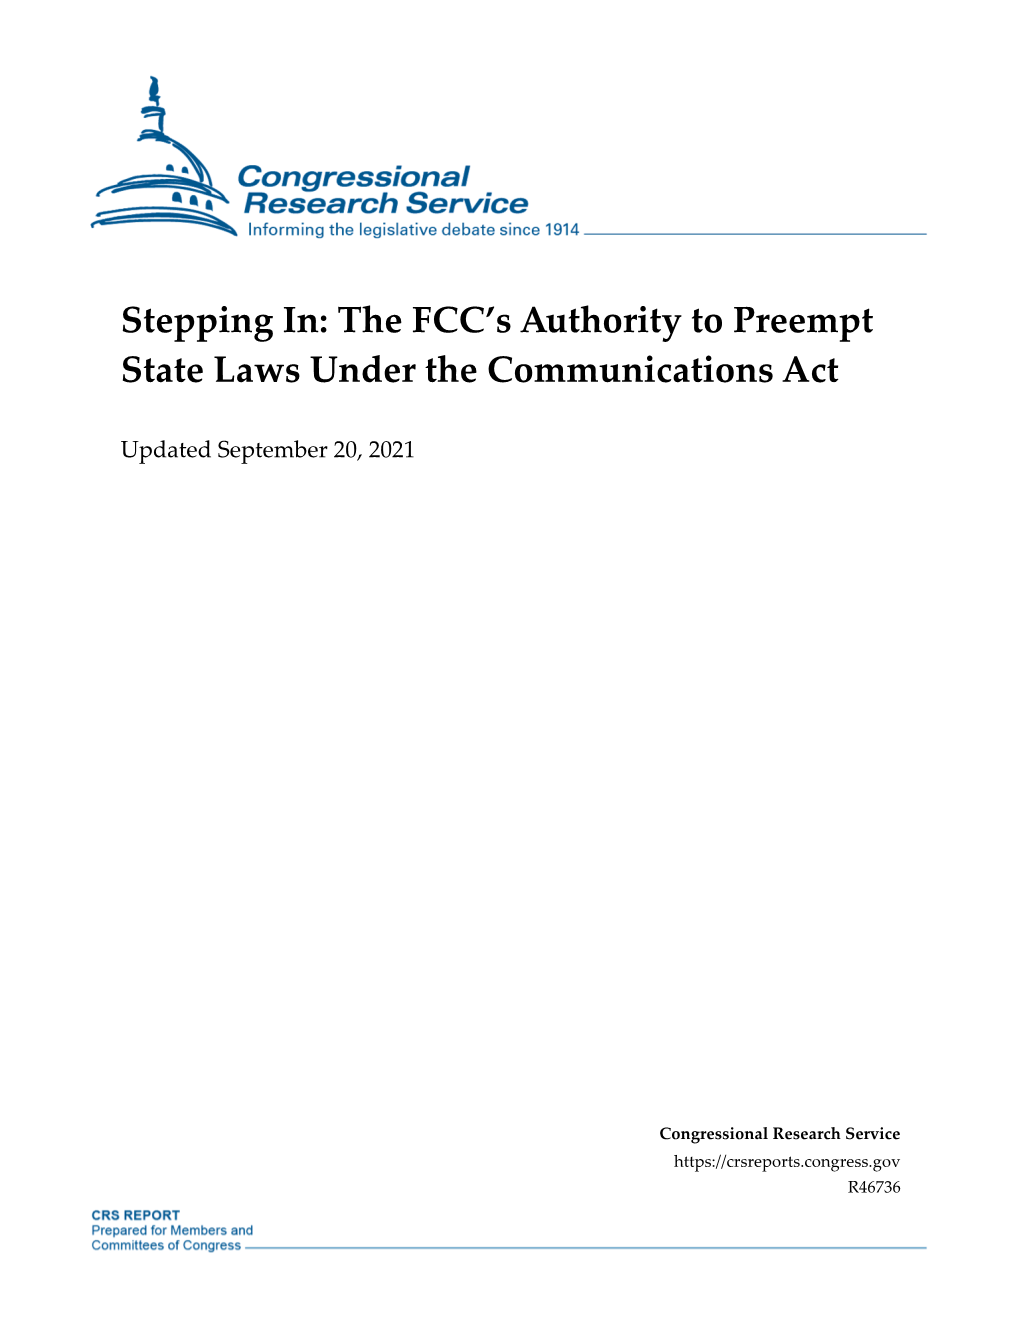 The FCC's Authority to Preempt State Laws Under the Communications